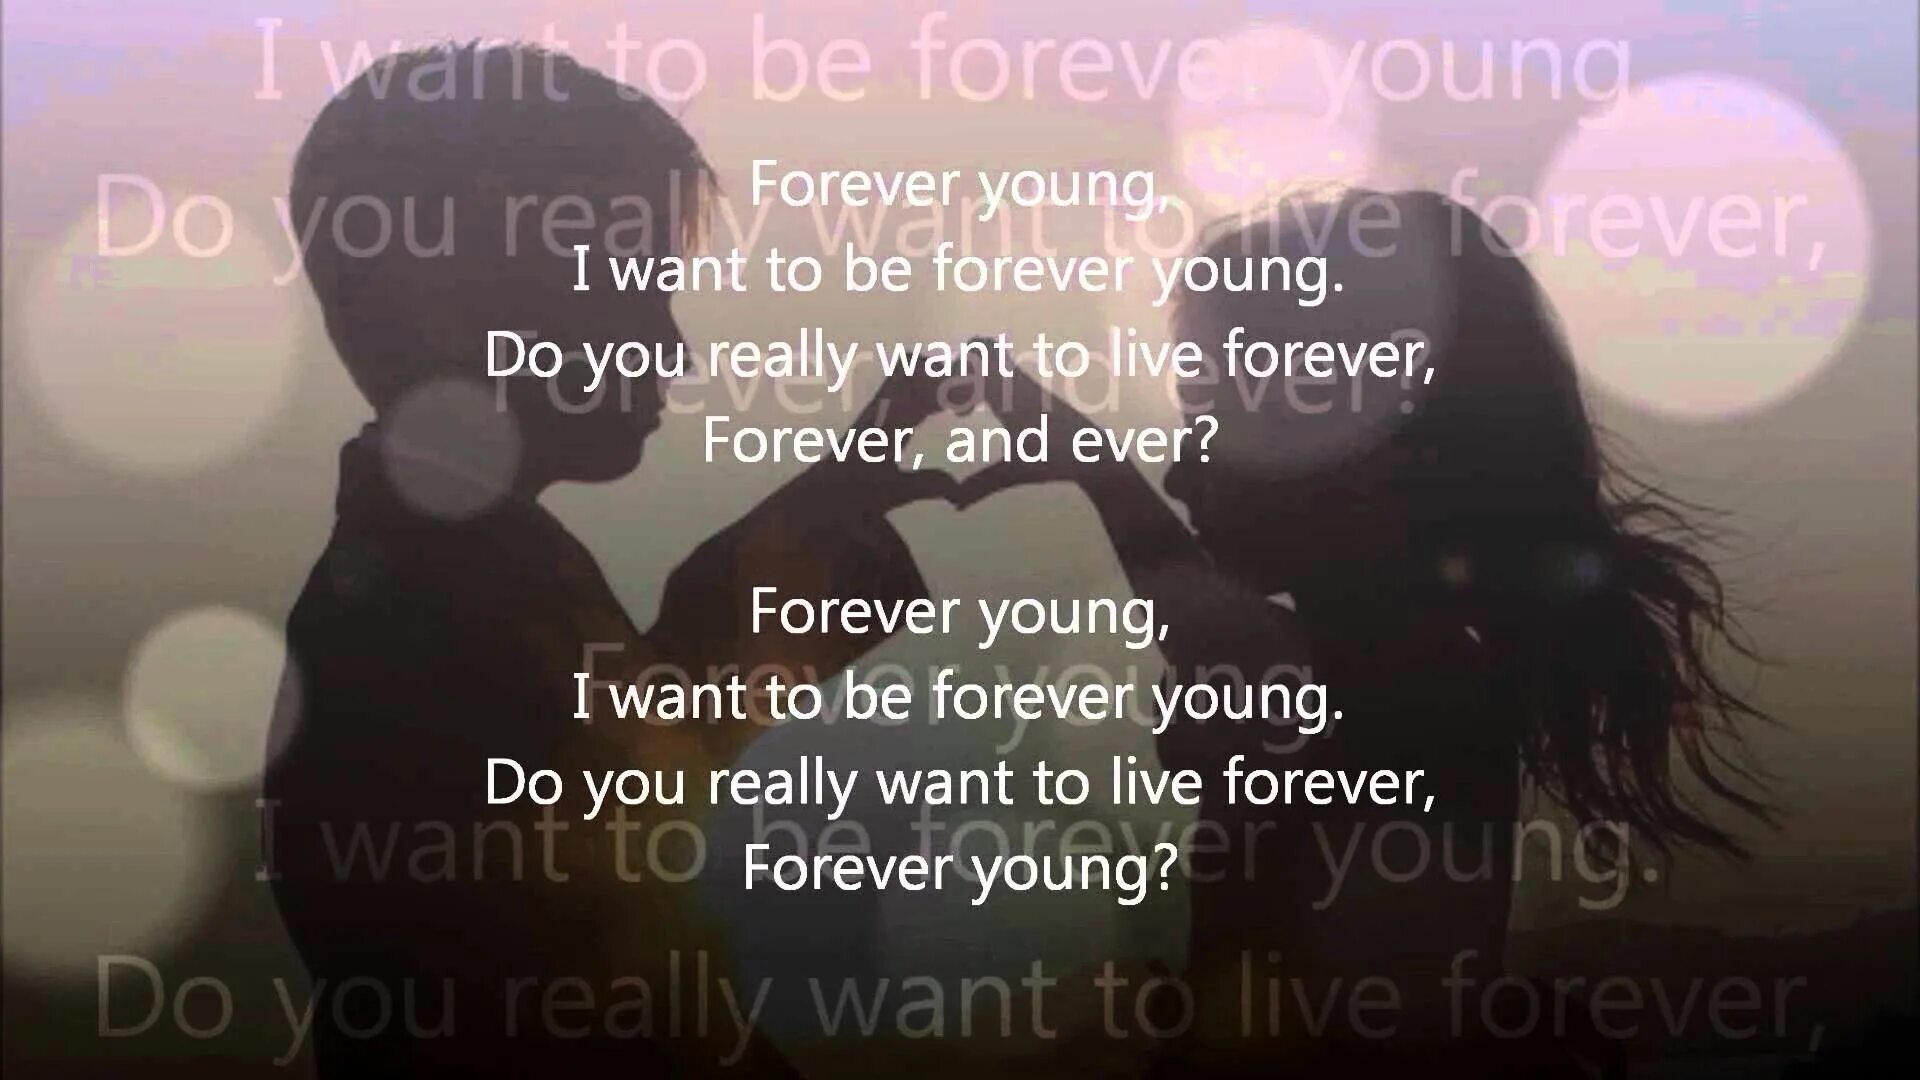 I wanna be Forever young. Forever young Alphaville Lyrics. I wanna be Forever young Alphaville. Forever young i want to be Forever young. When you are you really want